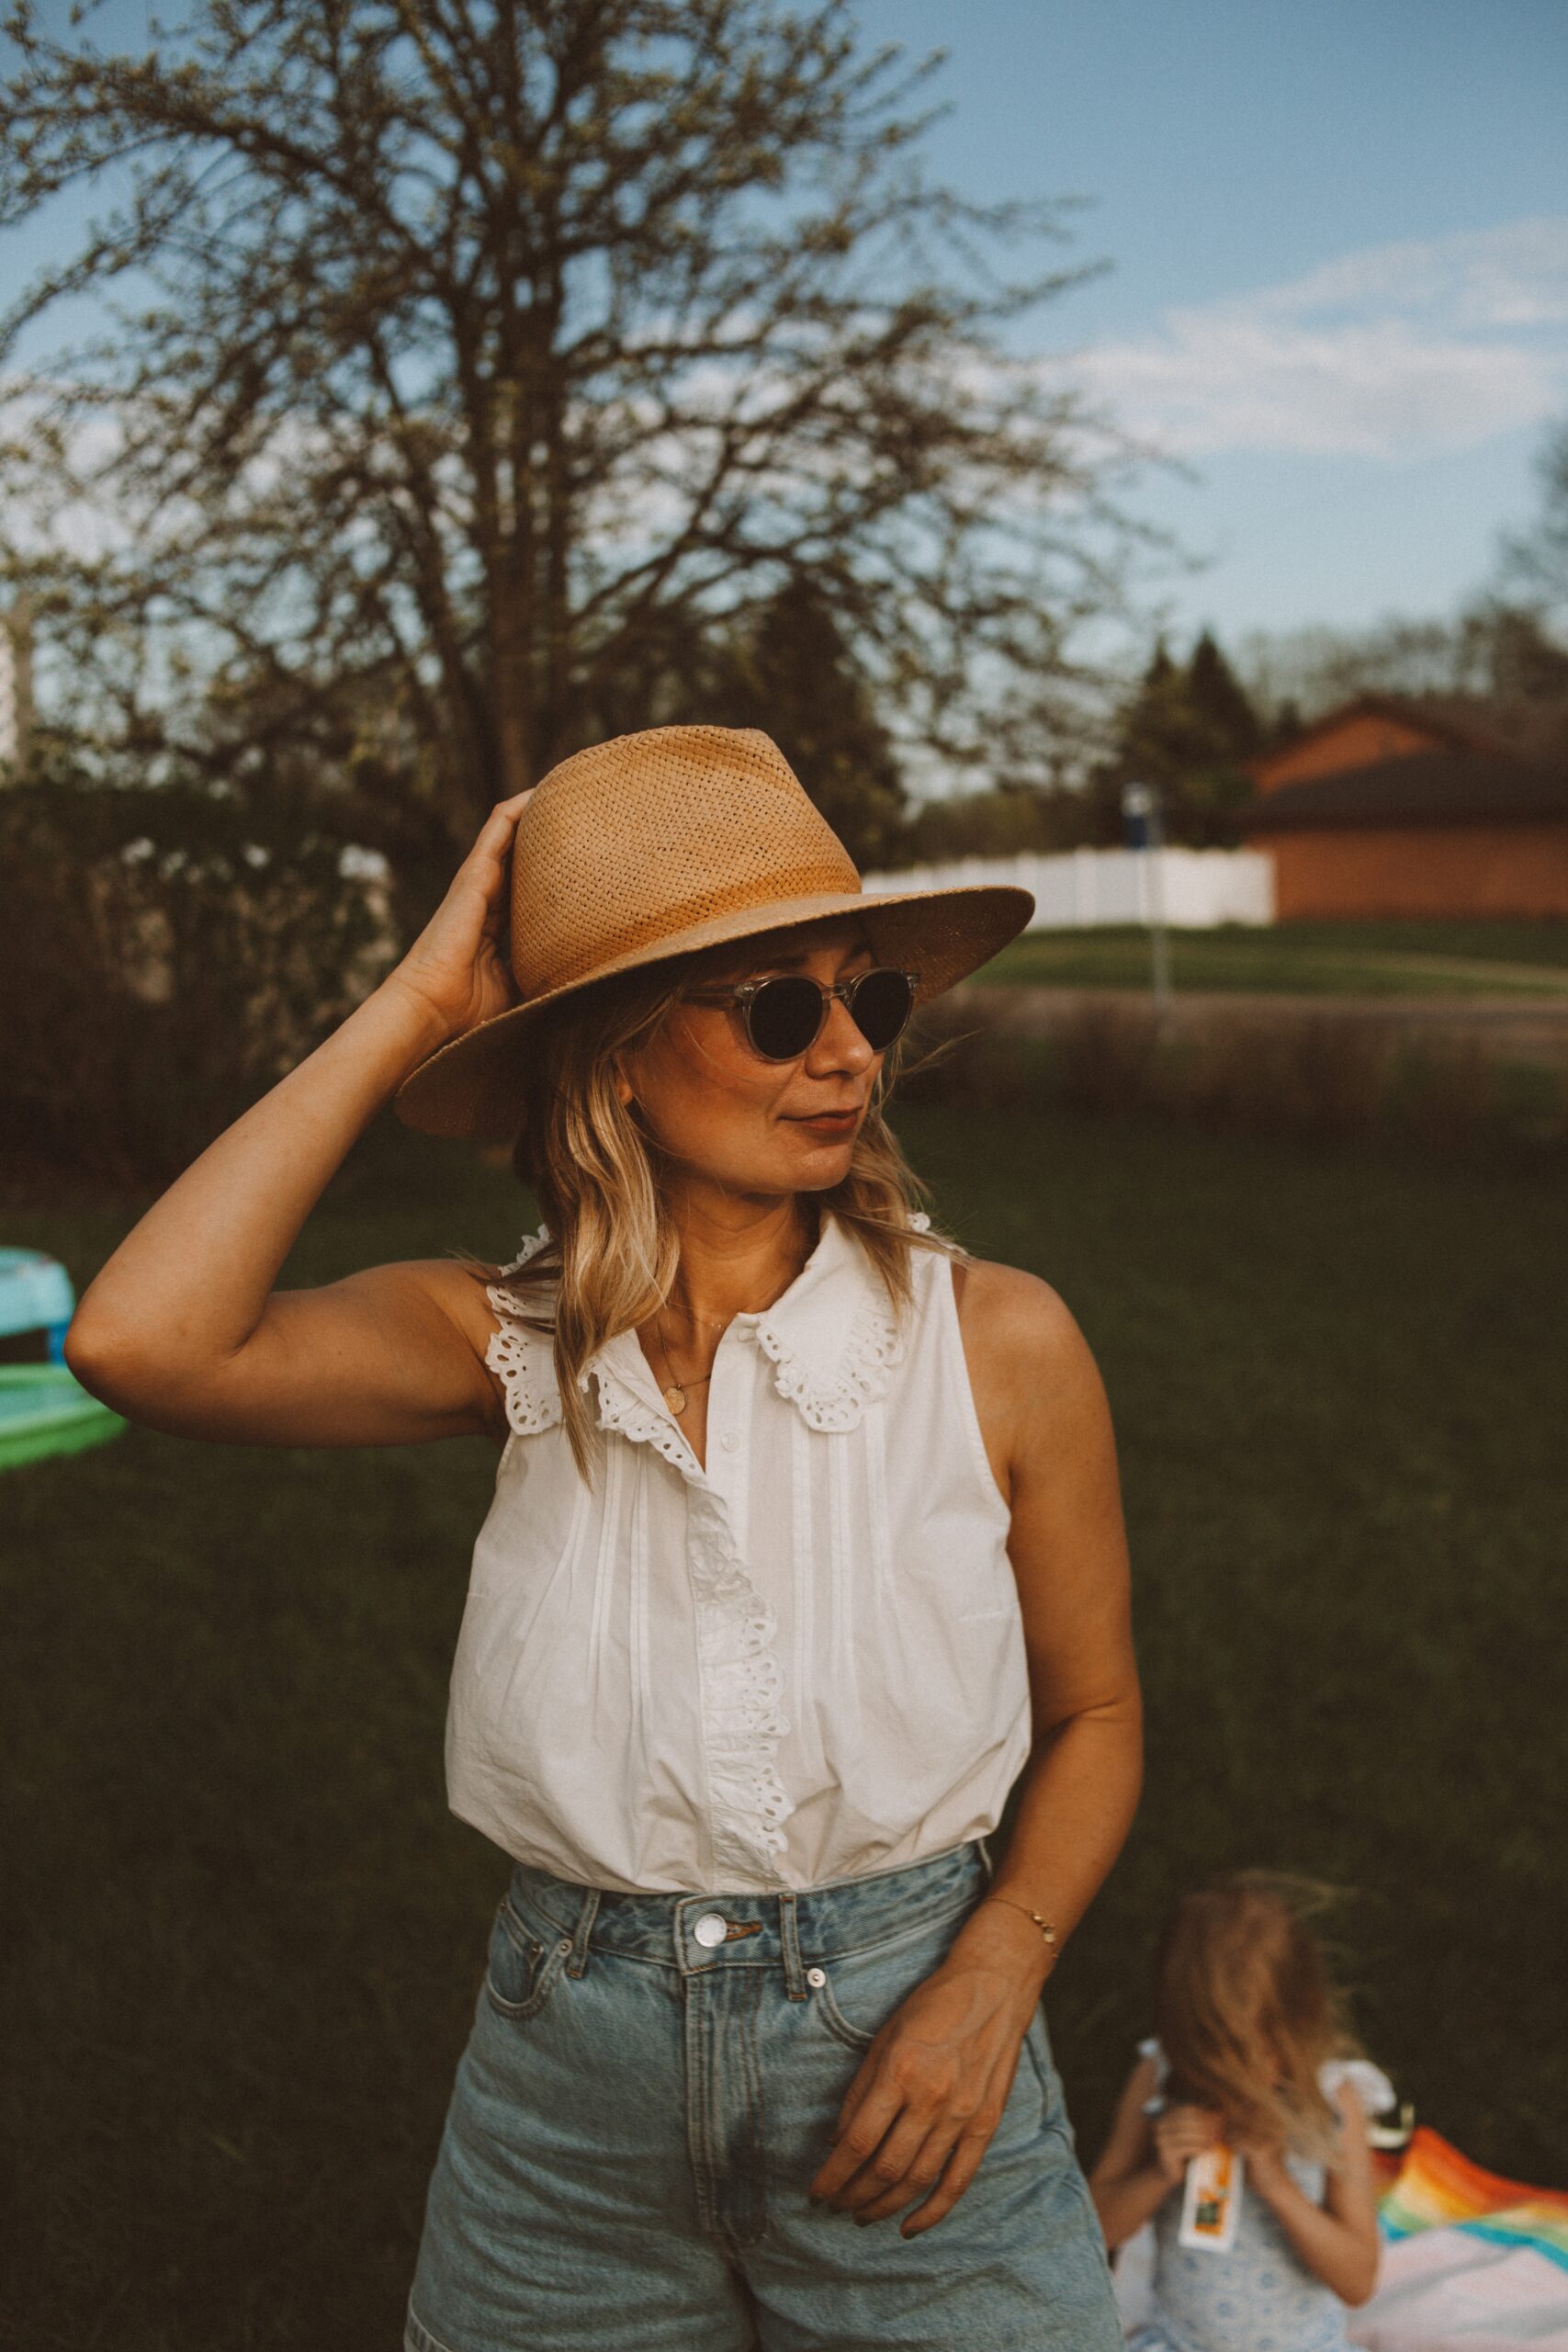 Karin Emily wears white tops from Sezane with a pair of Everlane denim shorts, and a janessa leone hat